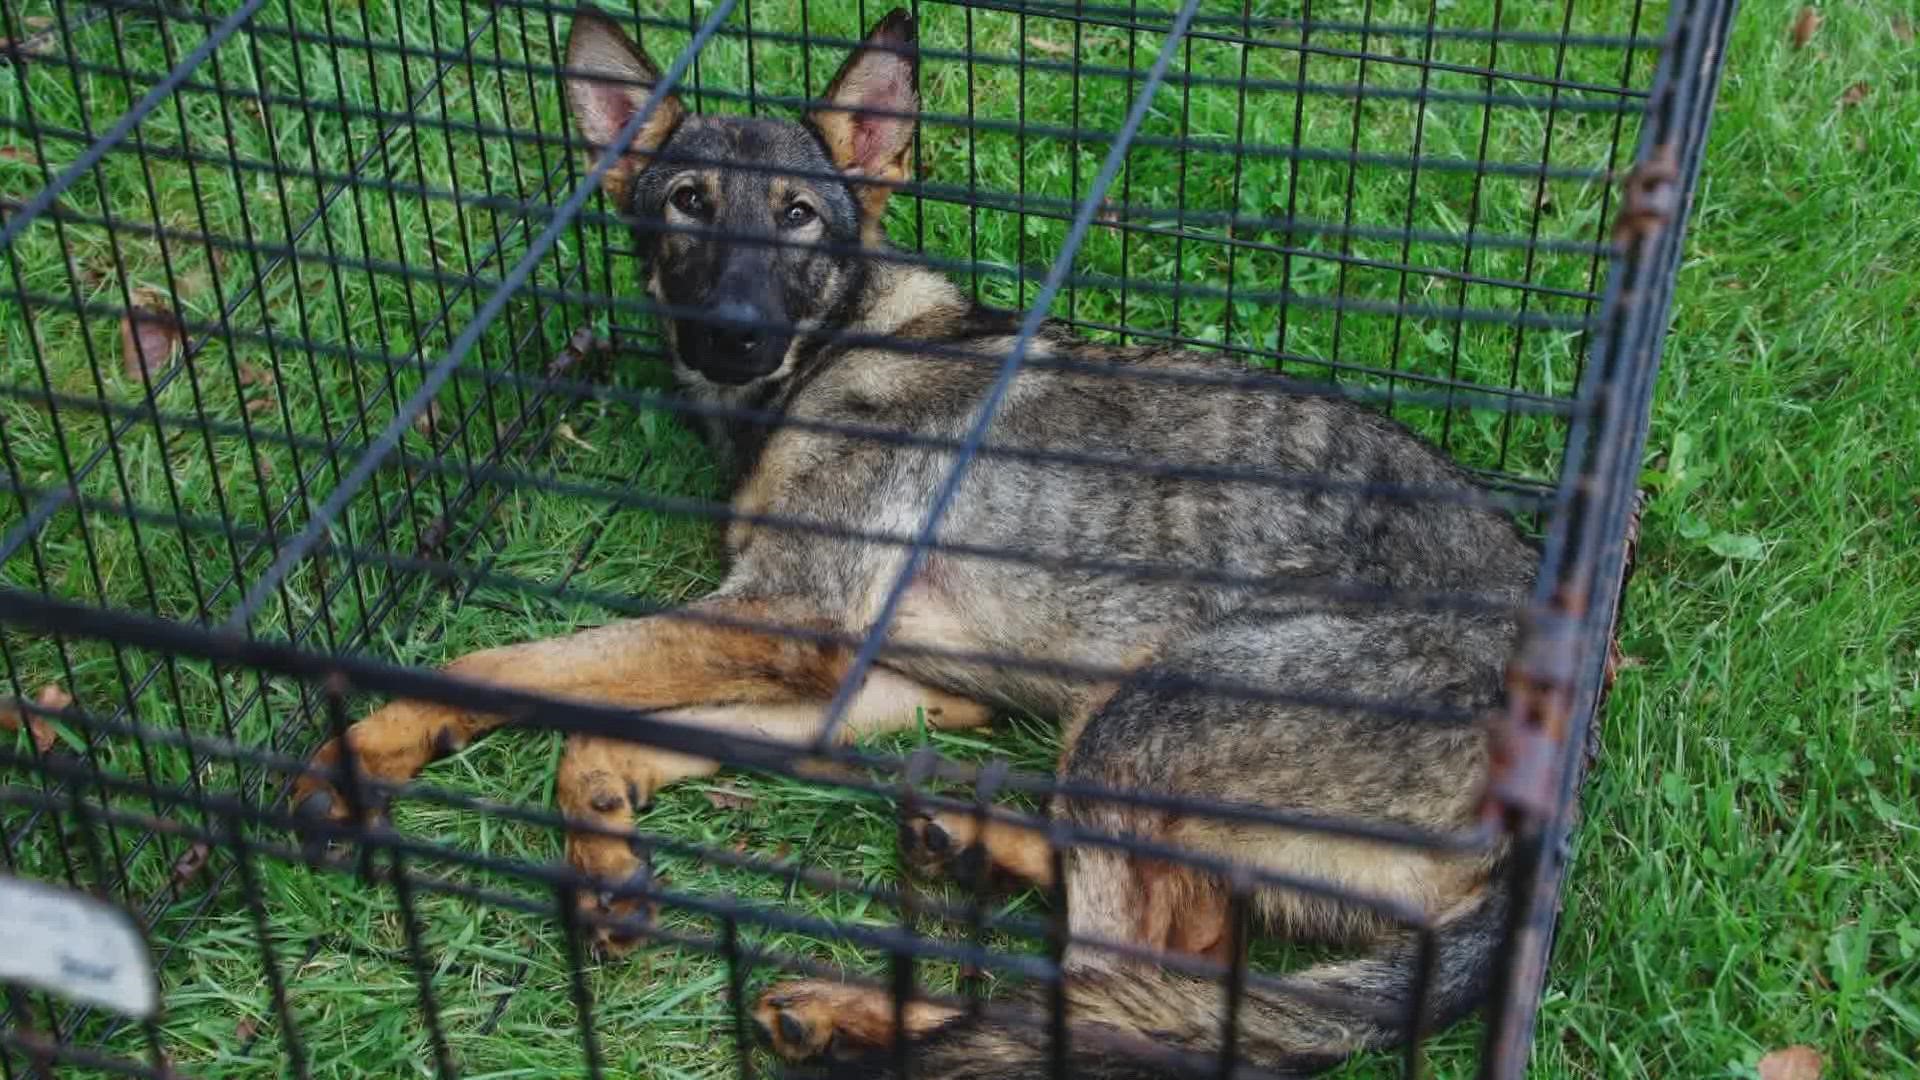 Two dog breeders in Indiana are facing 33 charges of animal cruelty.